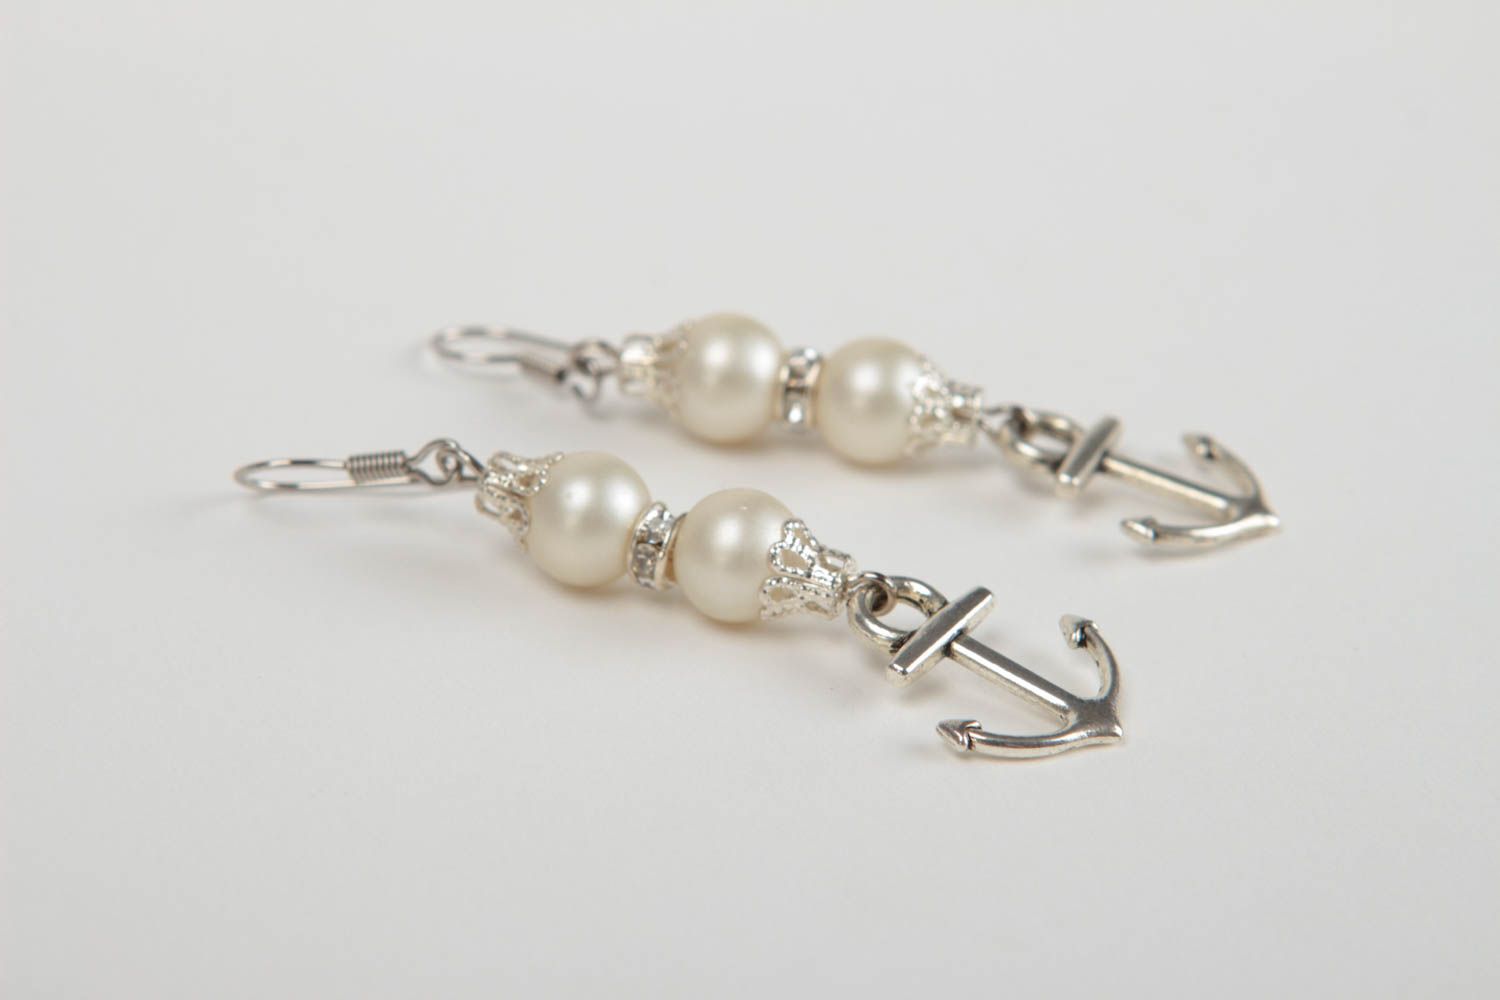 Handcrafted metal earrings with pearl beads designer jewelry gifts for her photo 3